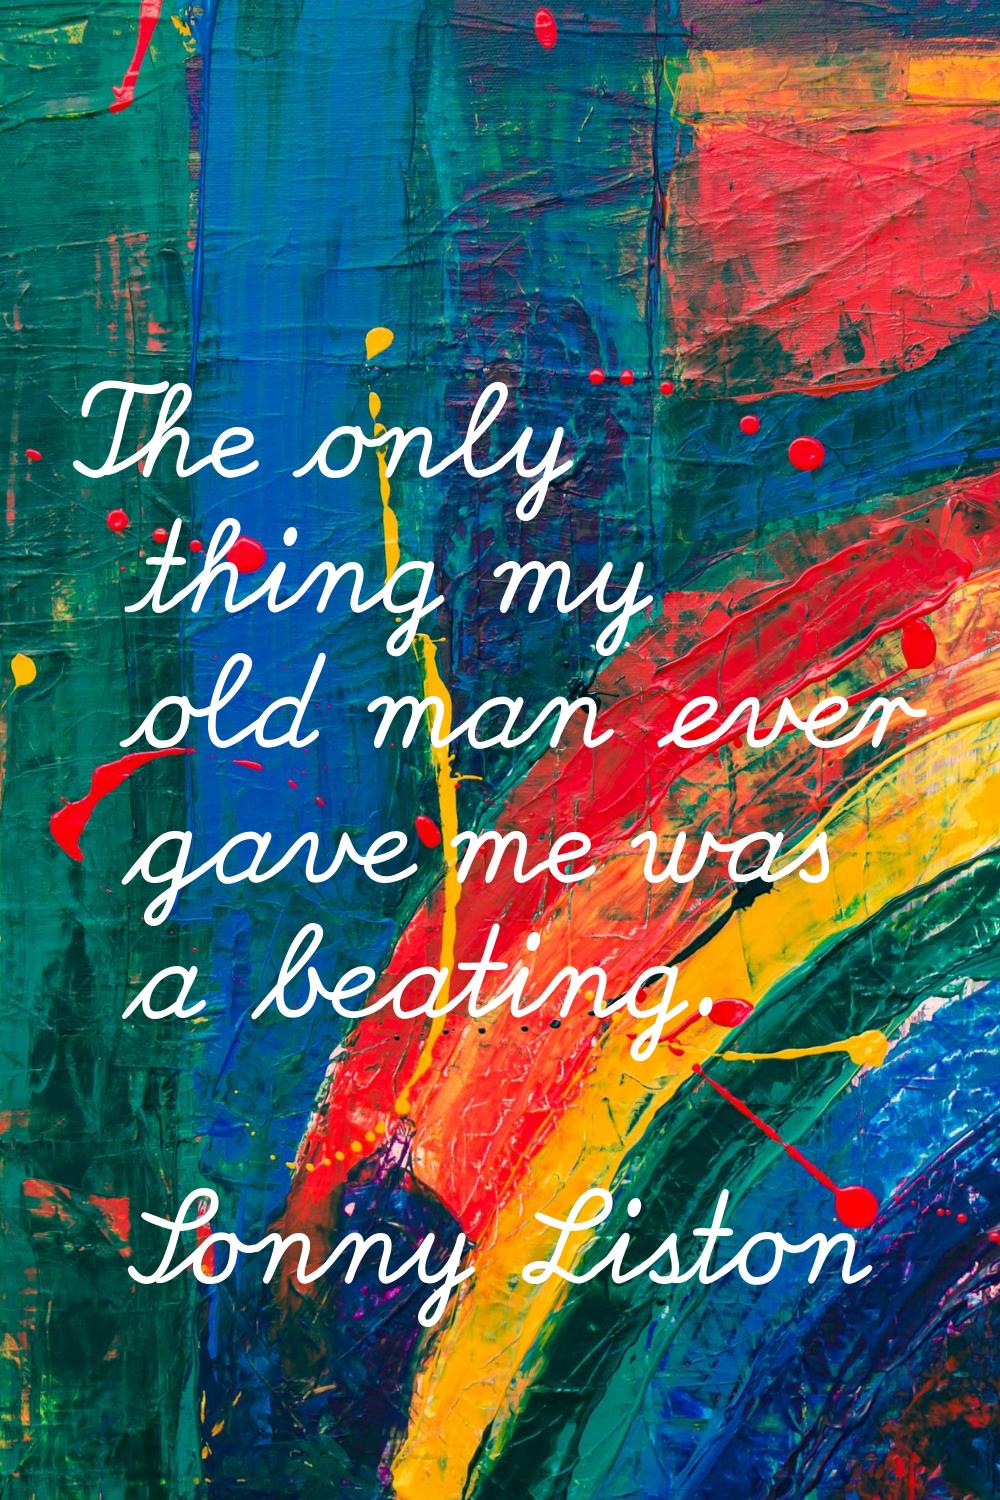 The only thing my old man ever gave me was a beating.